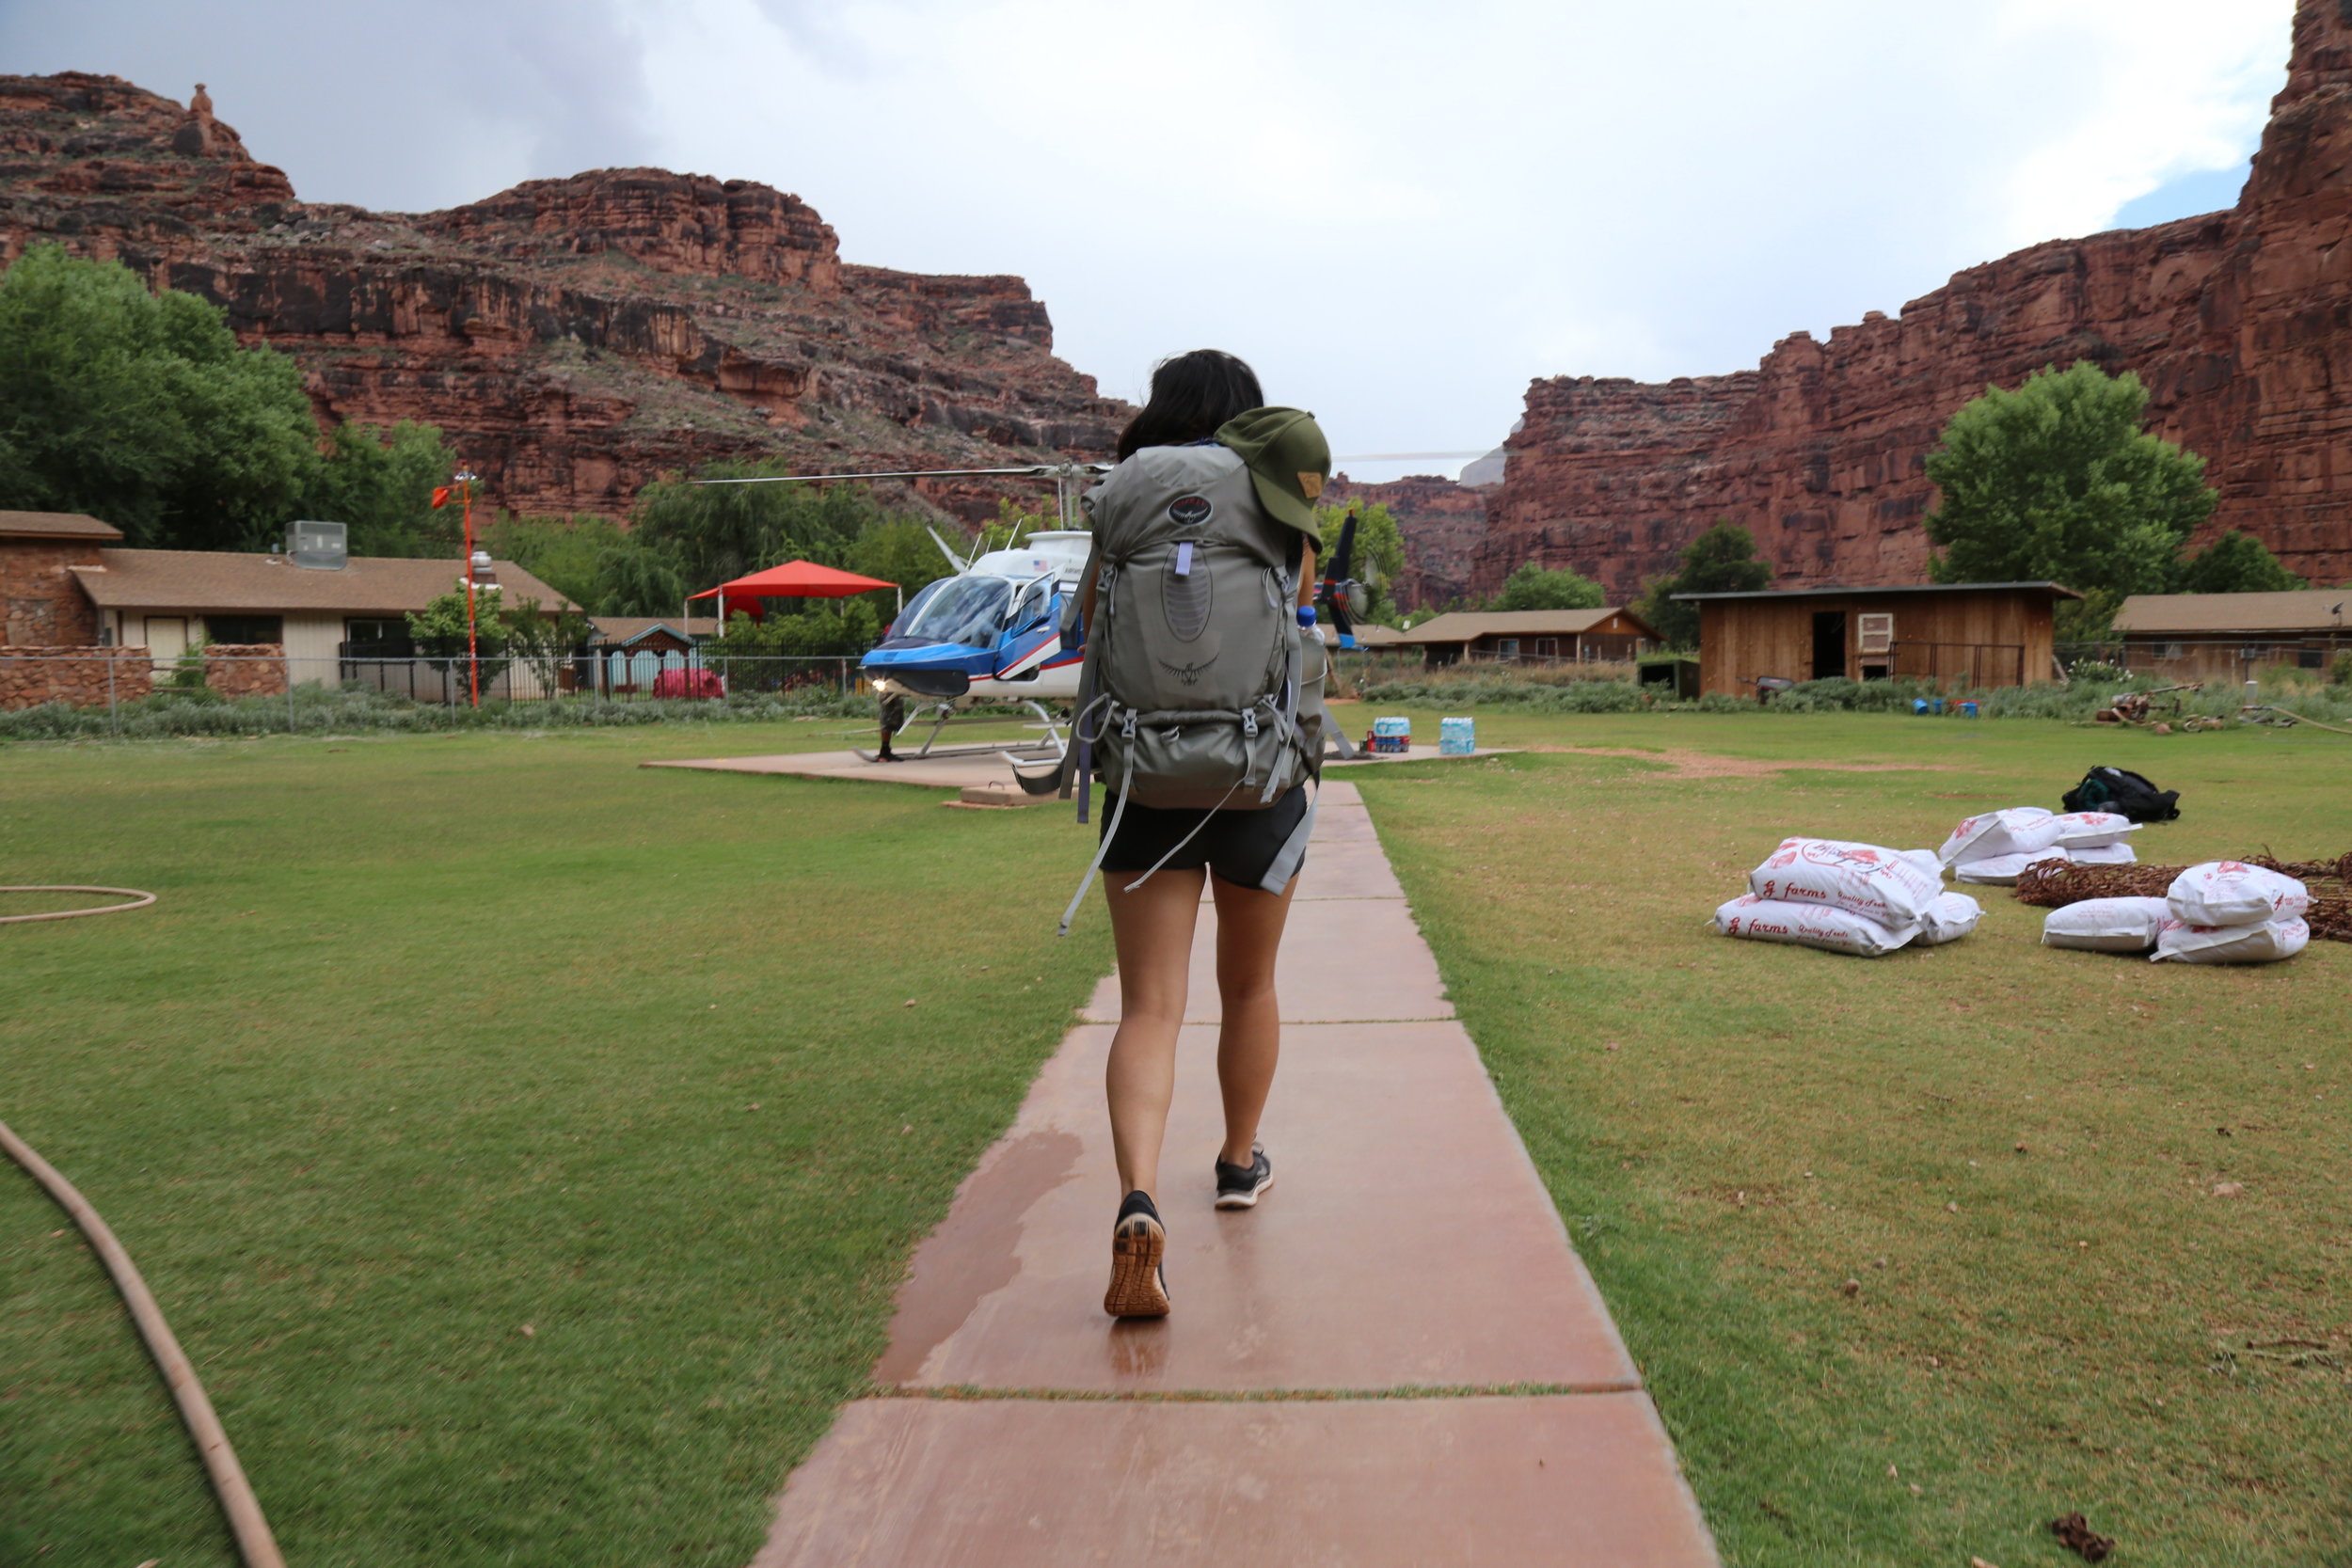 Taking the helicopter out of Supai Village